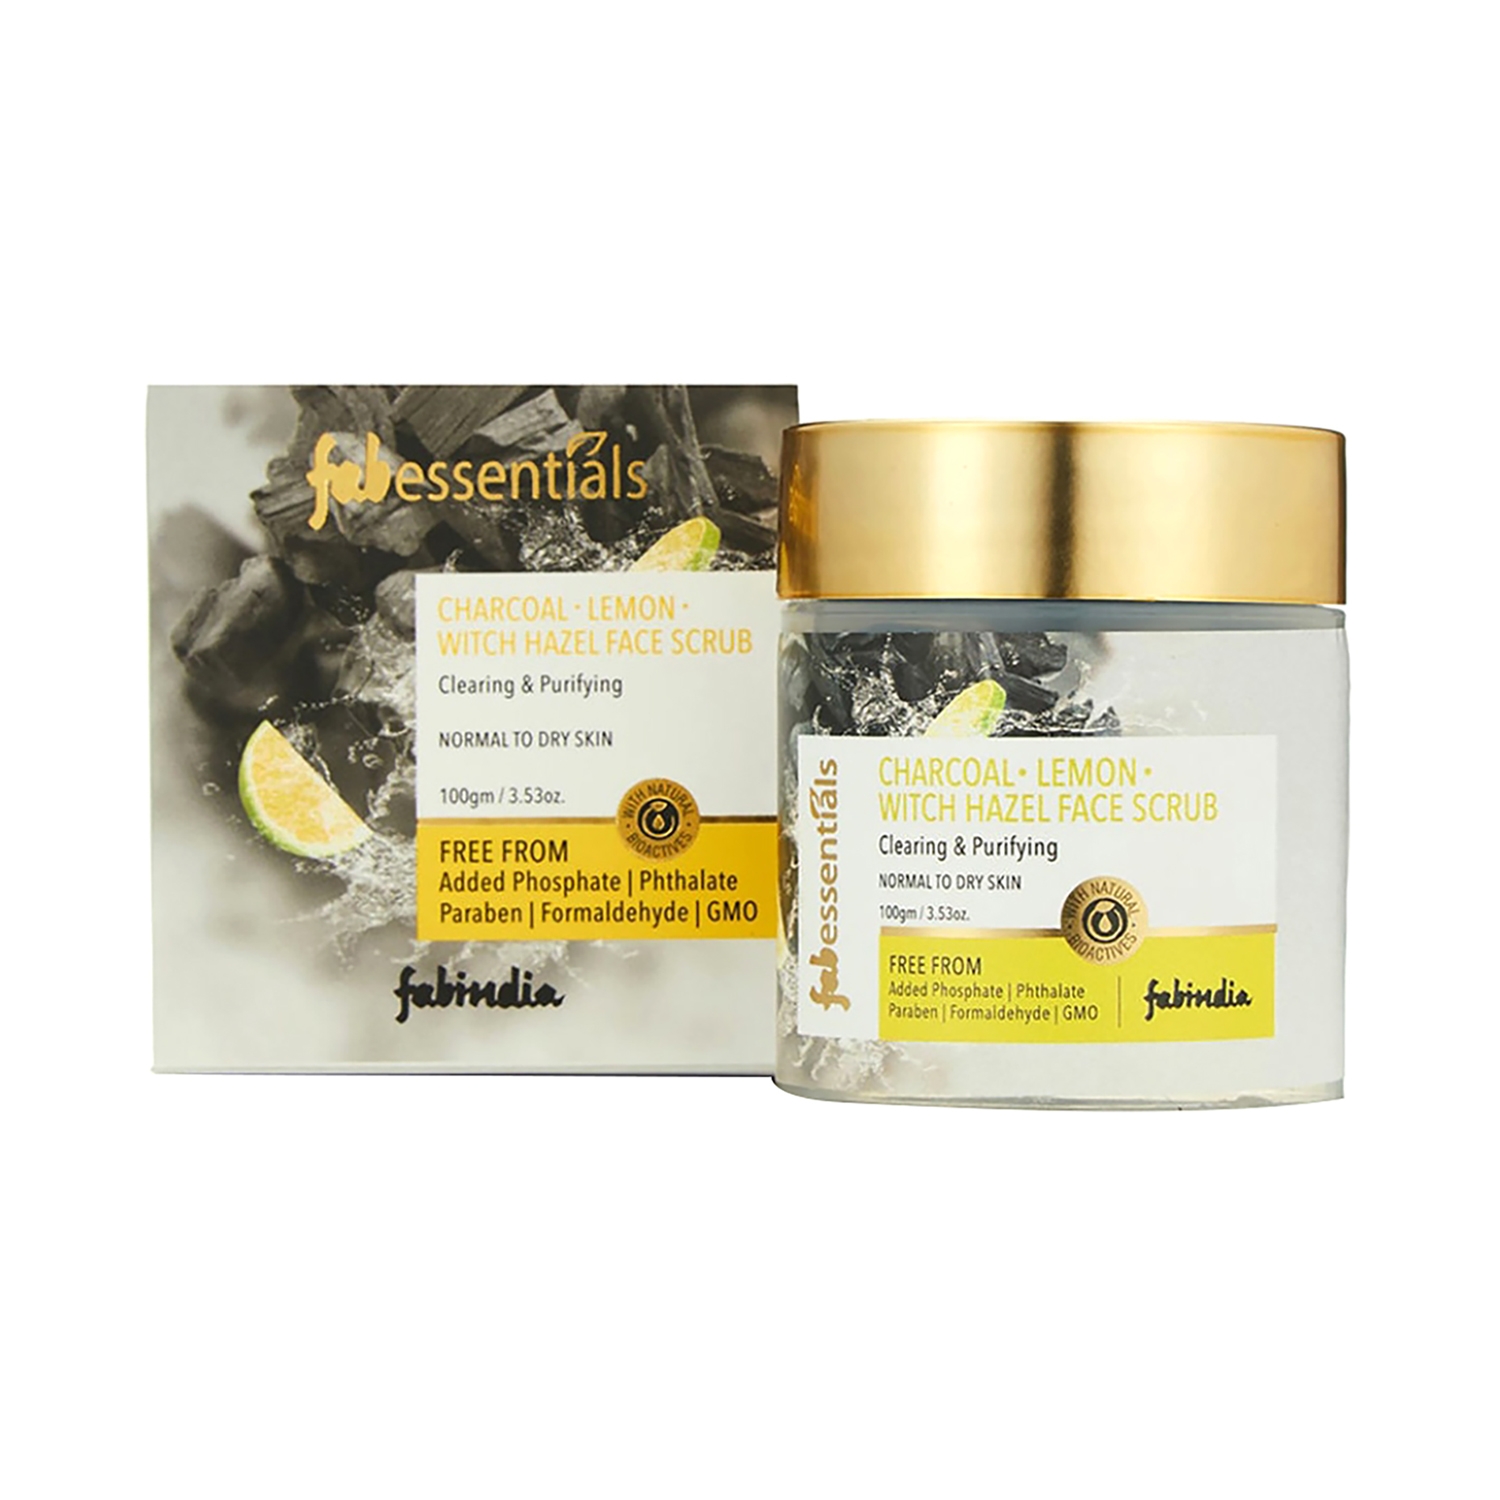 Fabessentials by Fabindia | Fabessentials by Fabindia Charcoal Lemon Witch Hazel Face Scrub (100g)